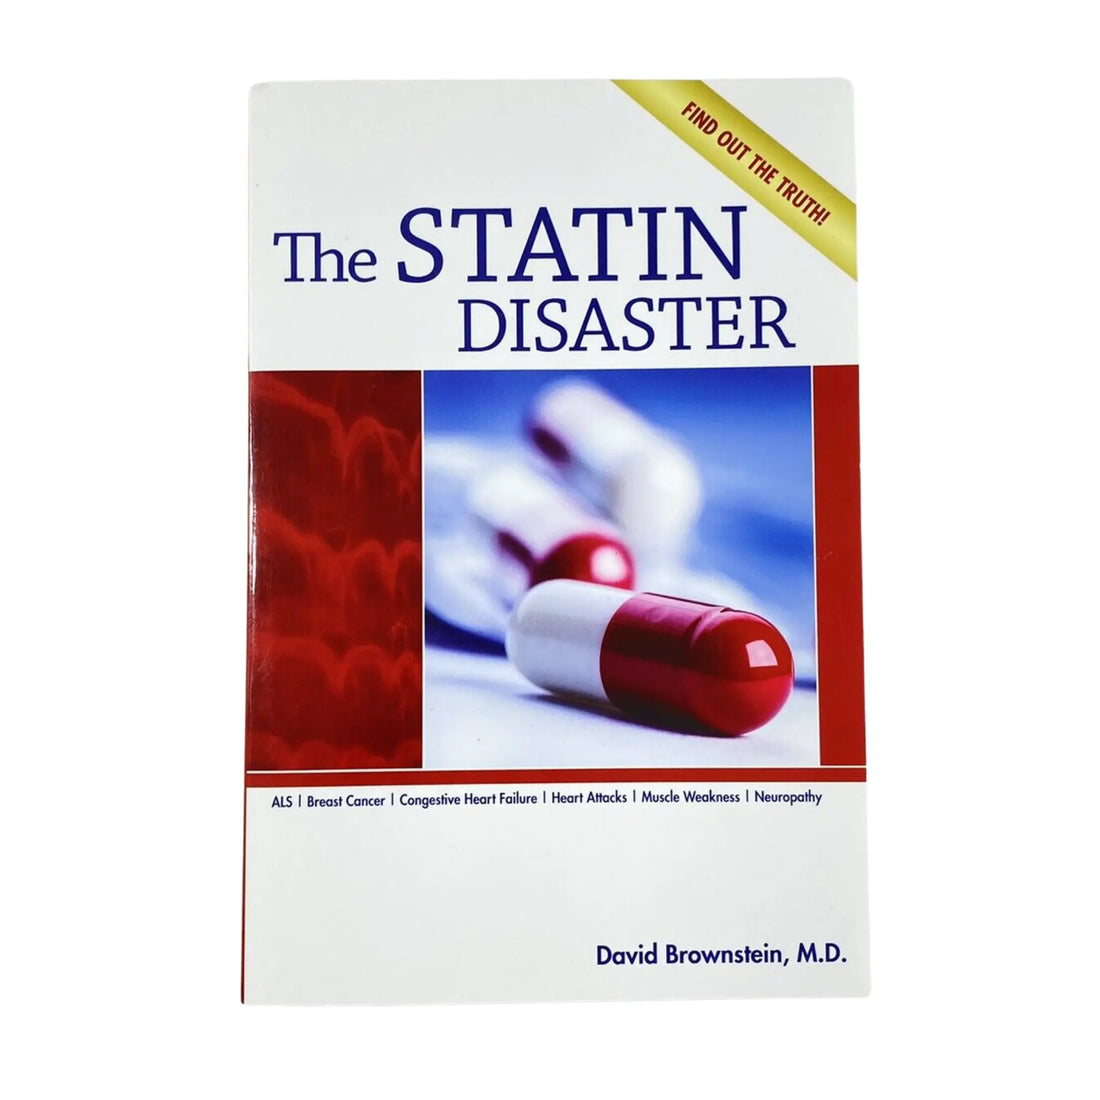 The Statin Disaster by Dr. Brownstein